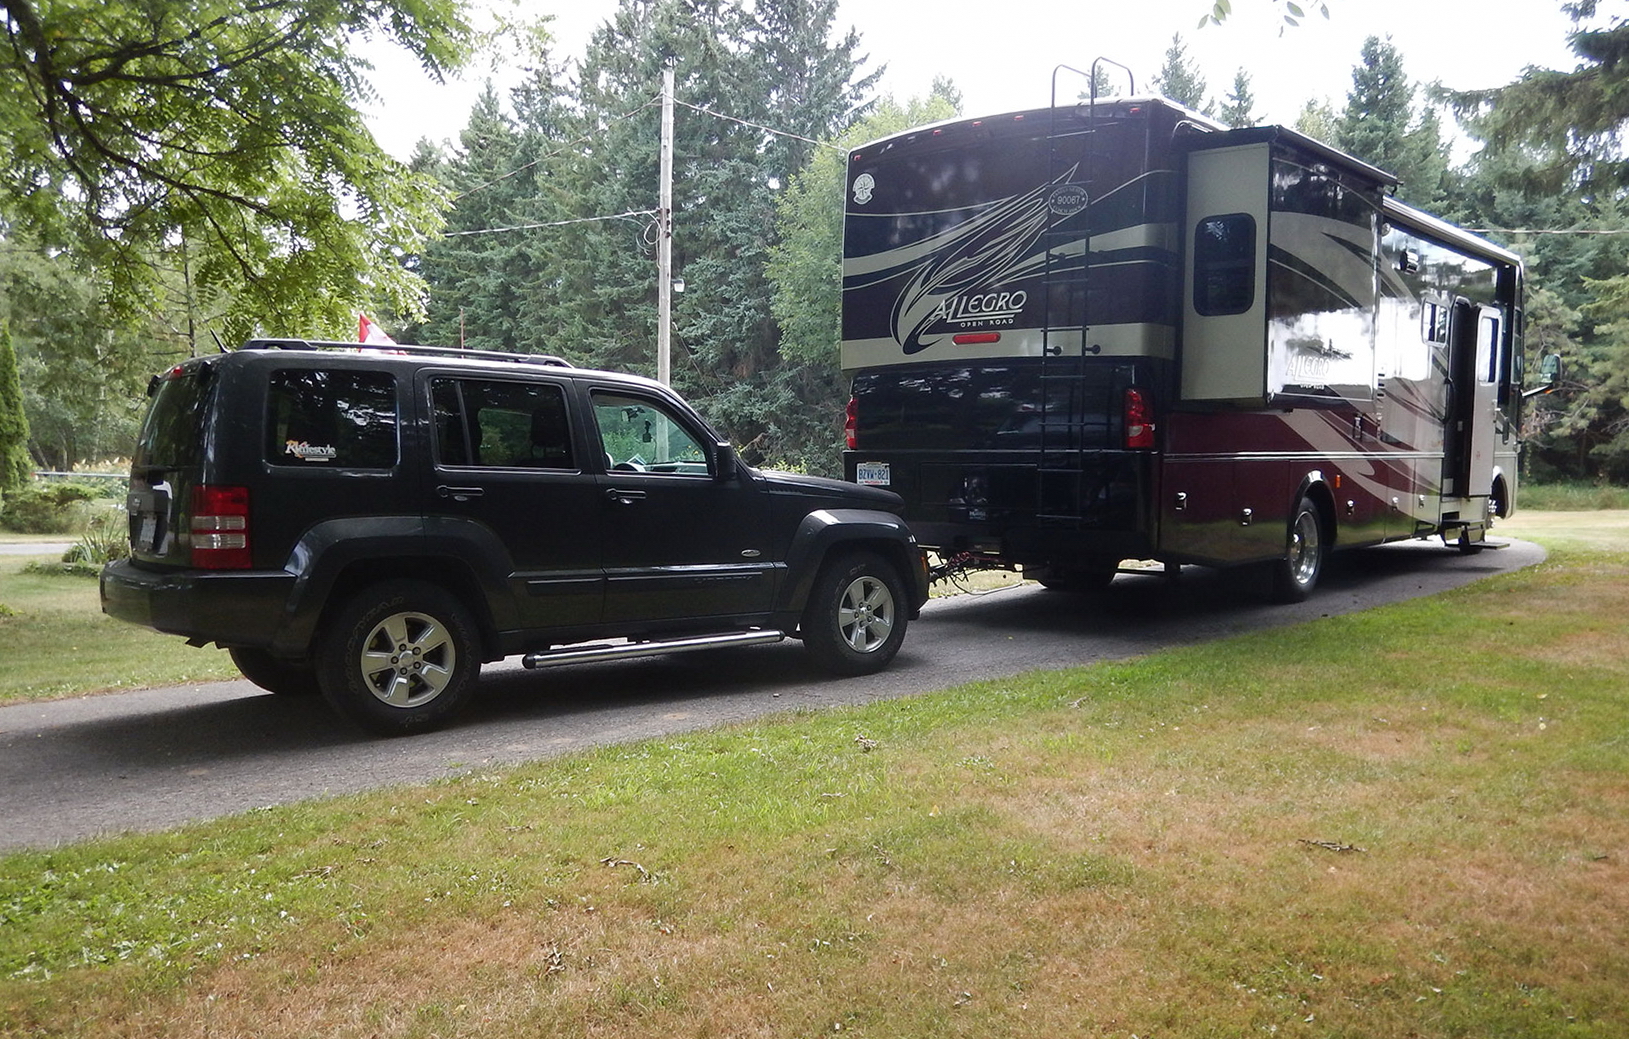 RV Tips: How to Tow a Car | RV Lifestyle Magazine